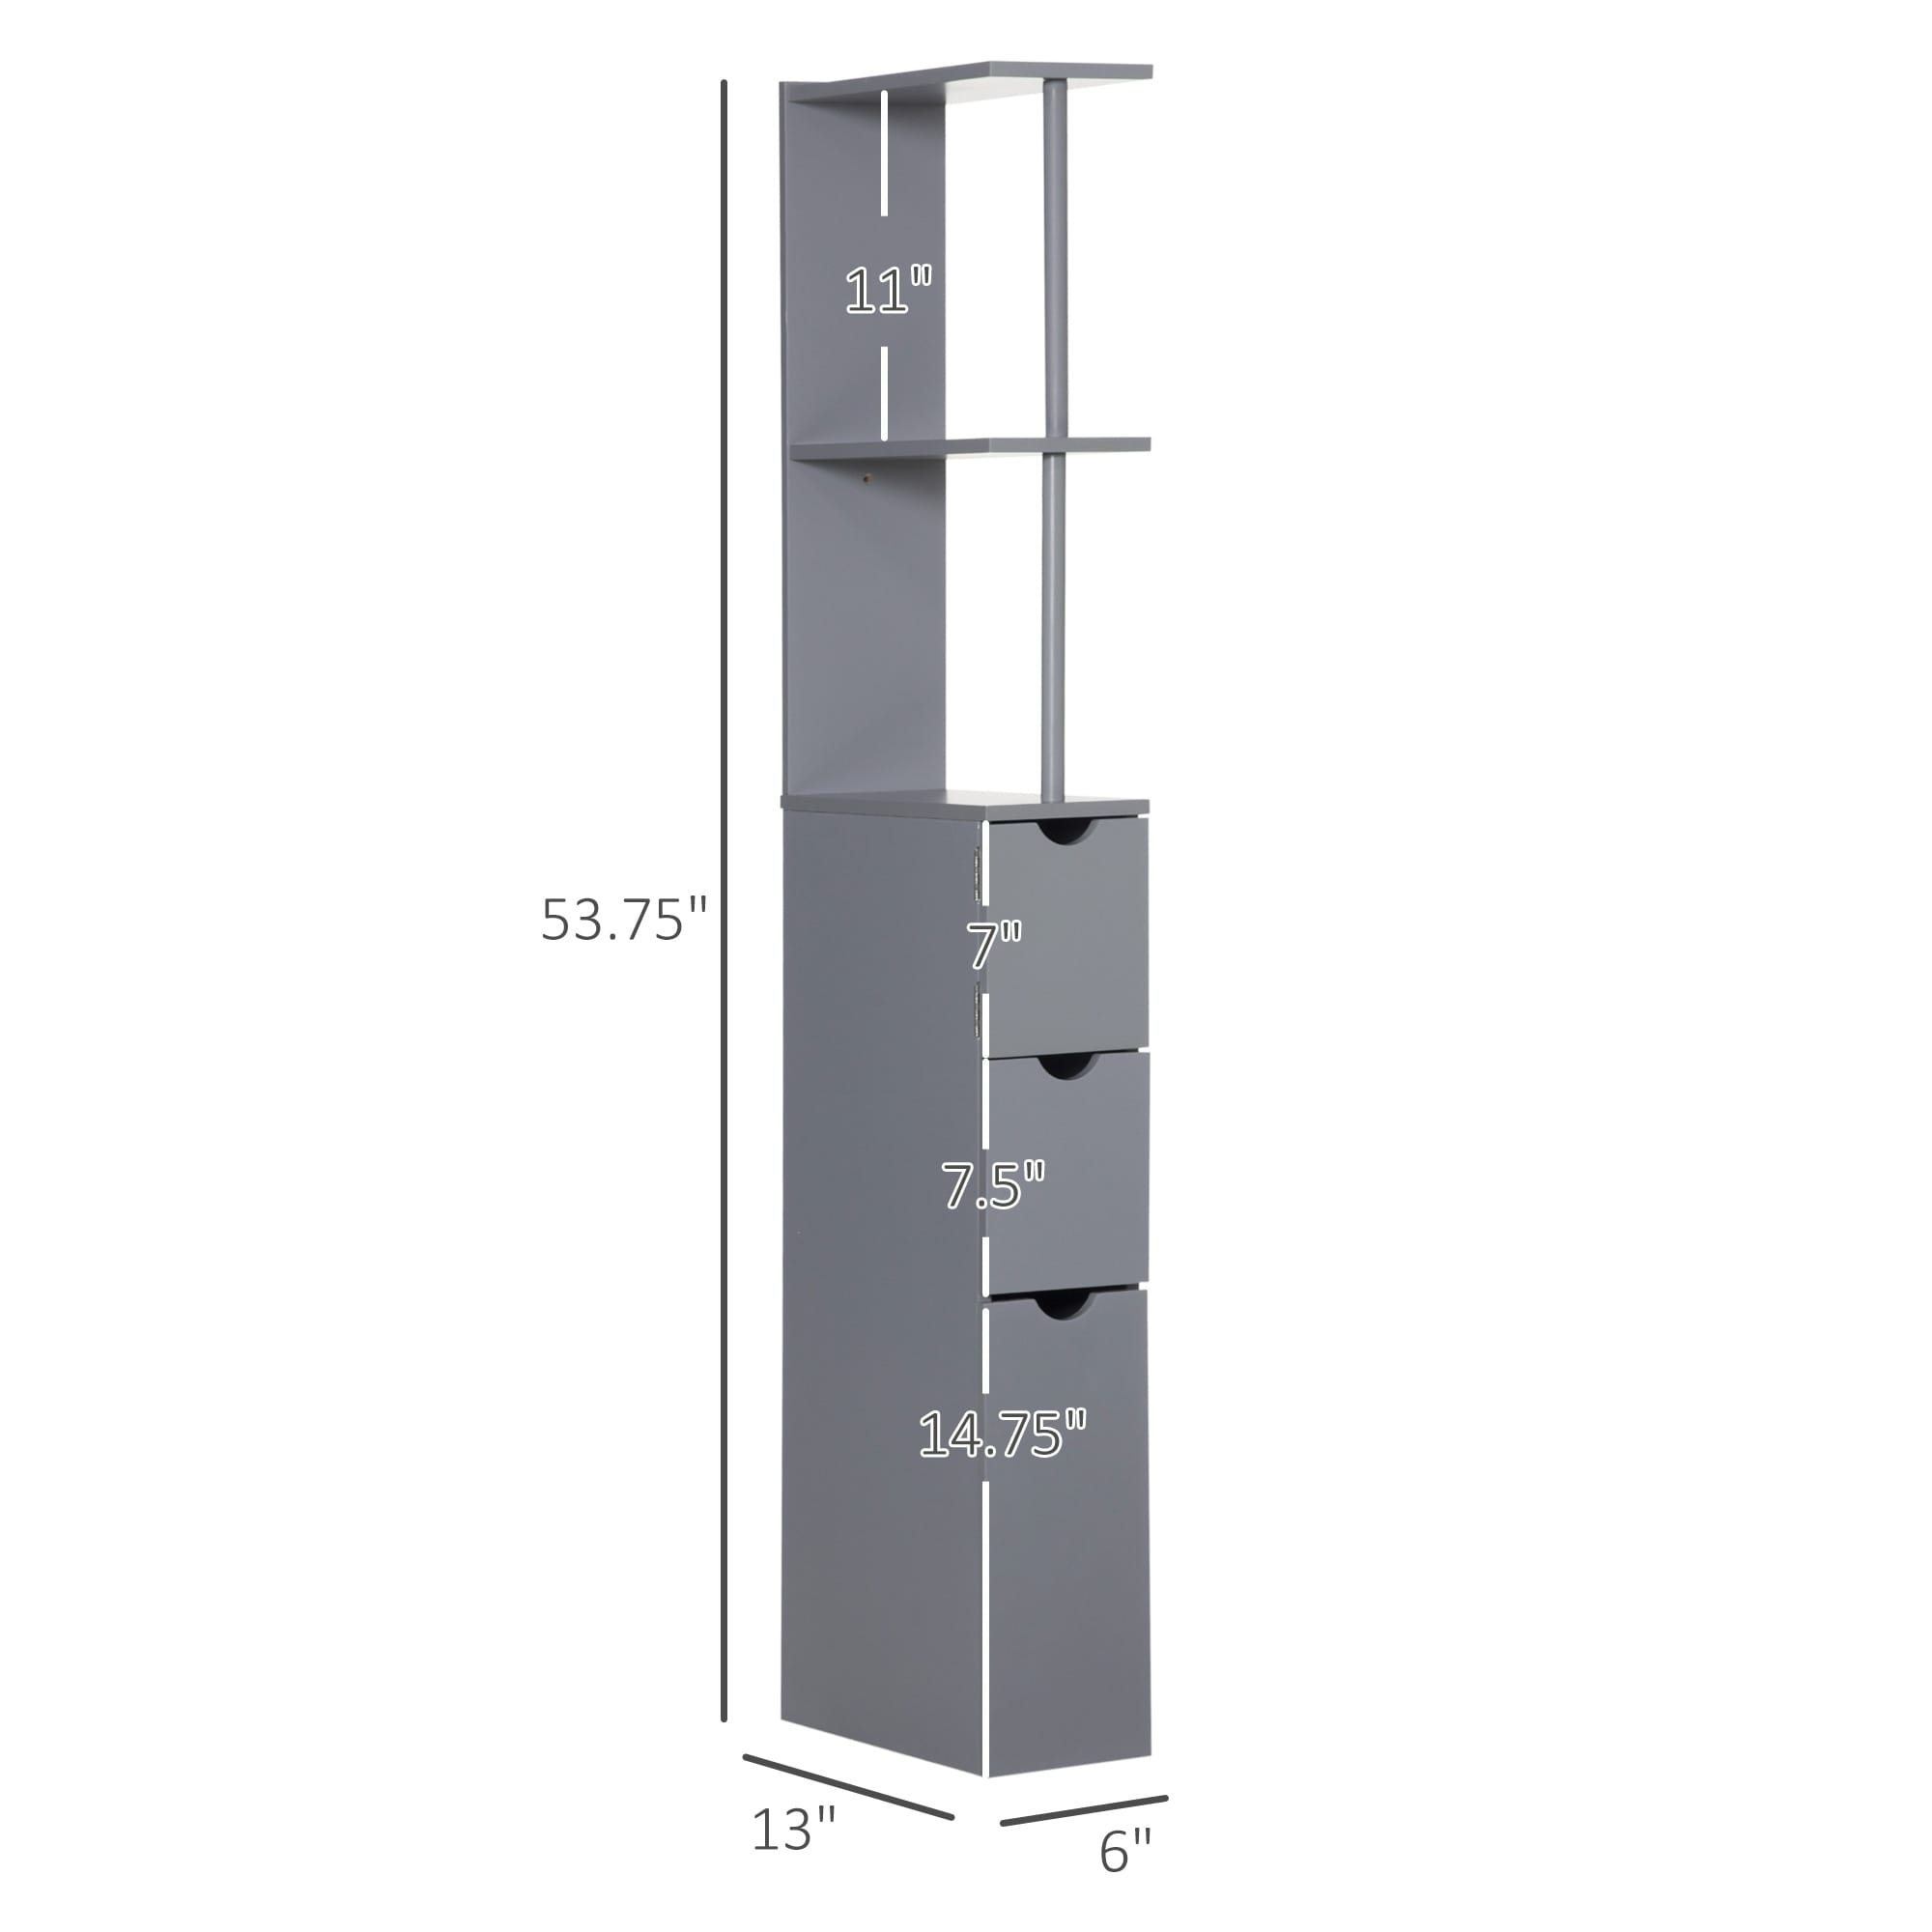 https://ak1.ostkcdn.com/images/products/is/images/direct/ac48155d5ed23d225ad402e53fe4d06b73bebfc9/Bathroom-Tower-Storage-Cabinet.jpg